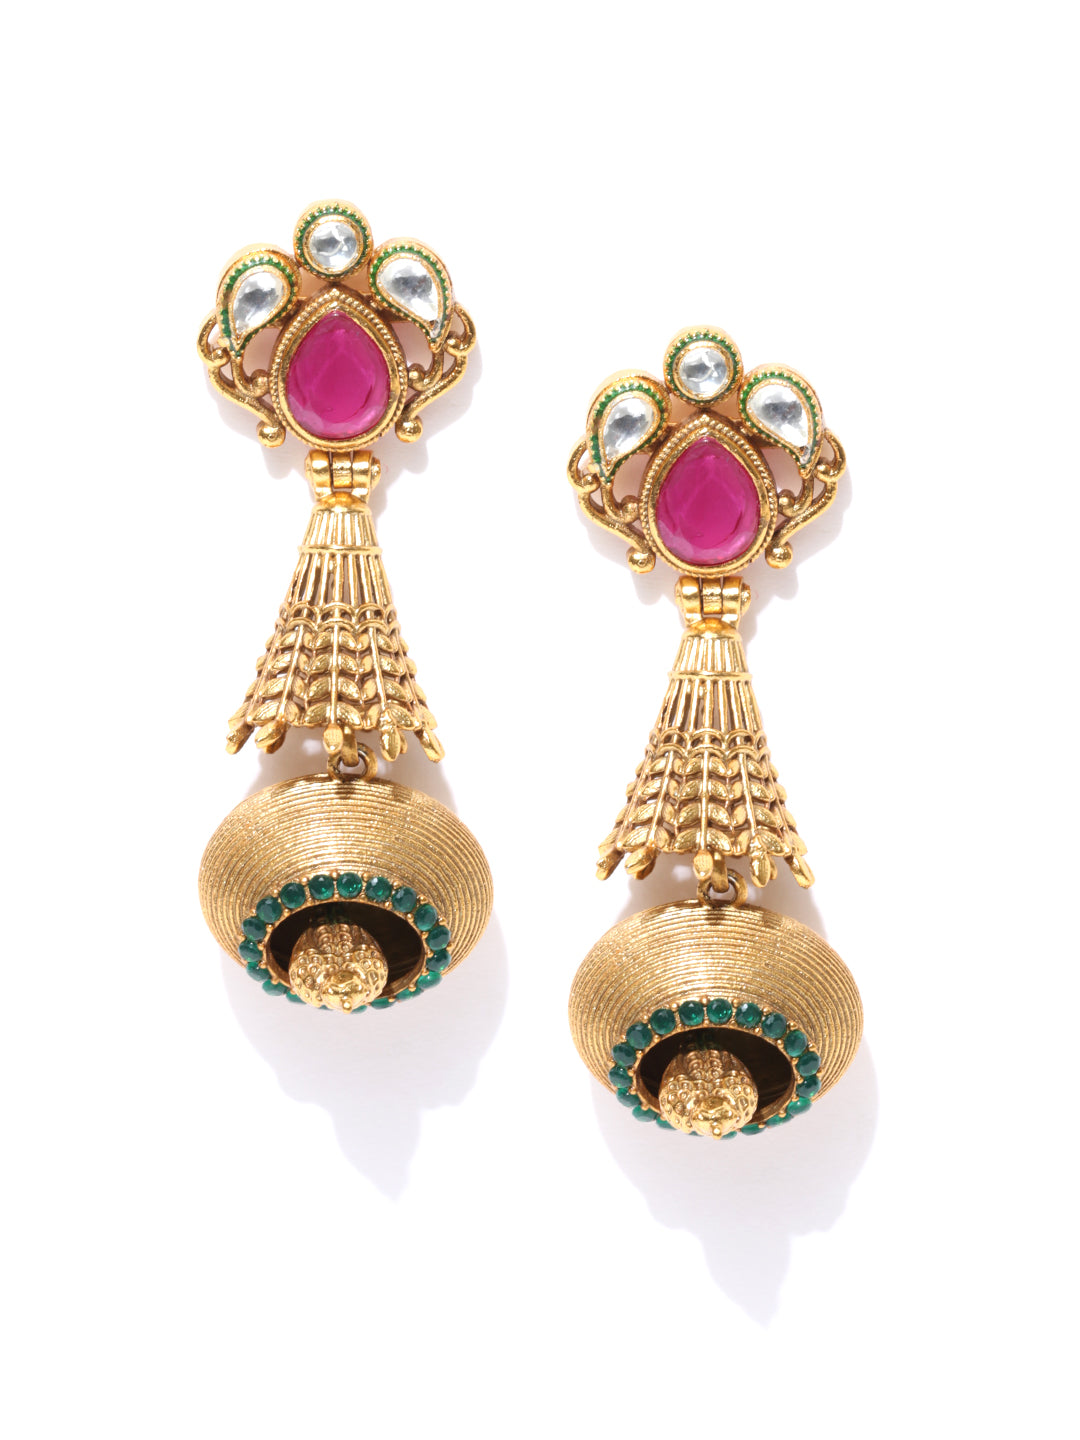 Gold-Plated Stones Studded Drop Earrings in Pink and Green Color